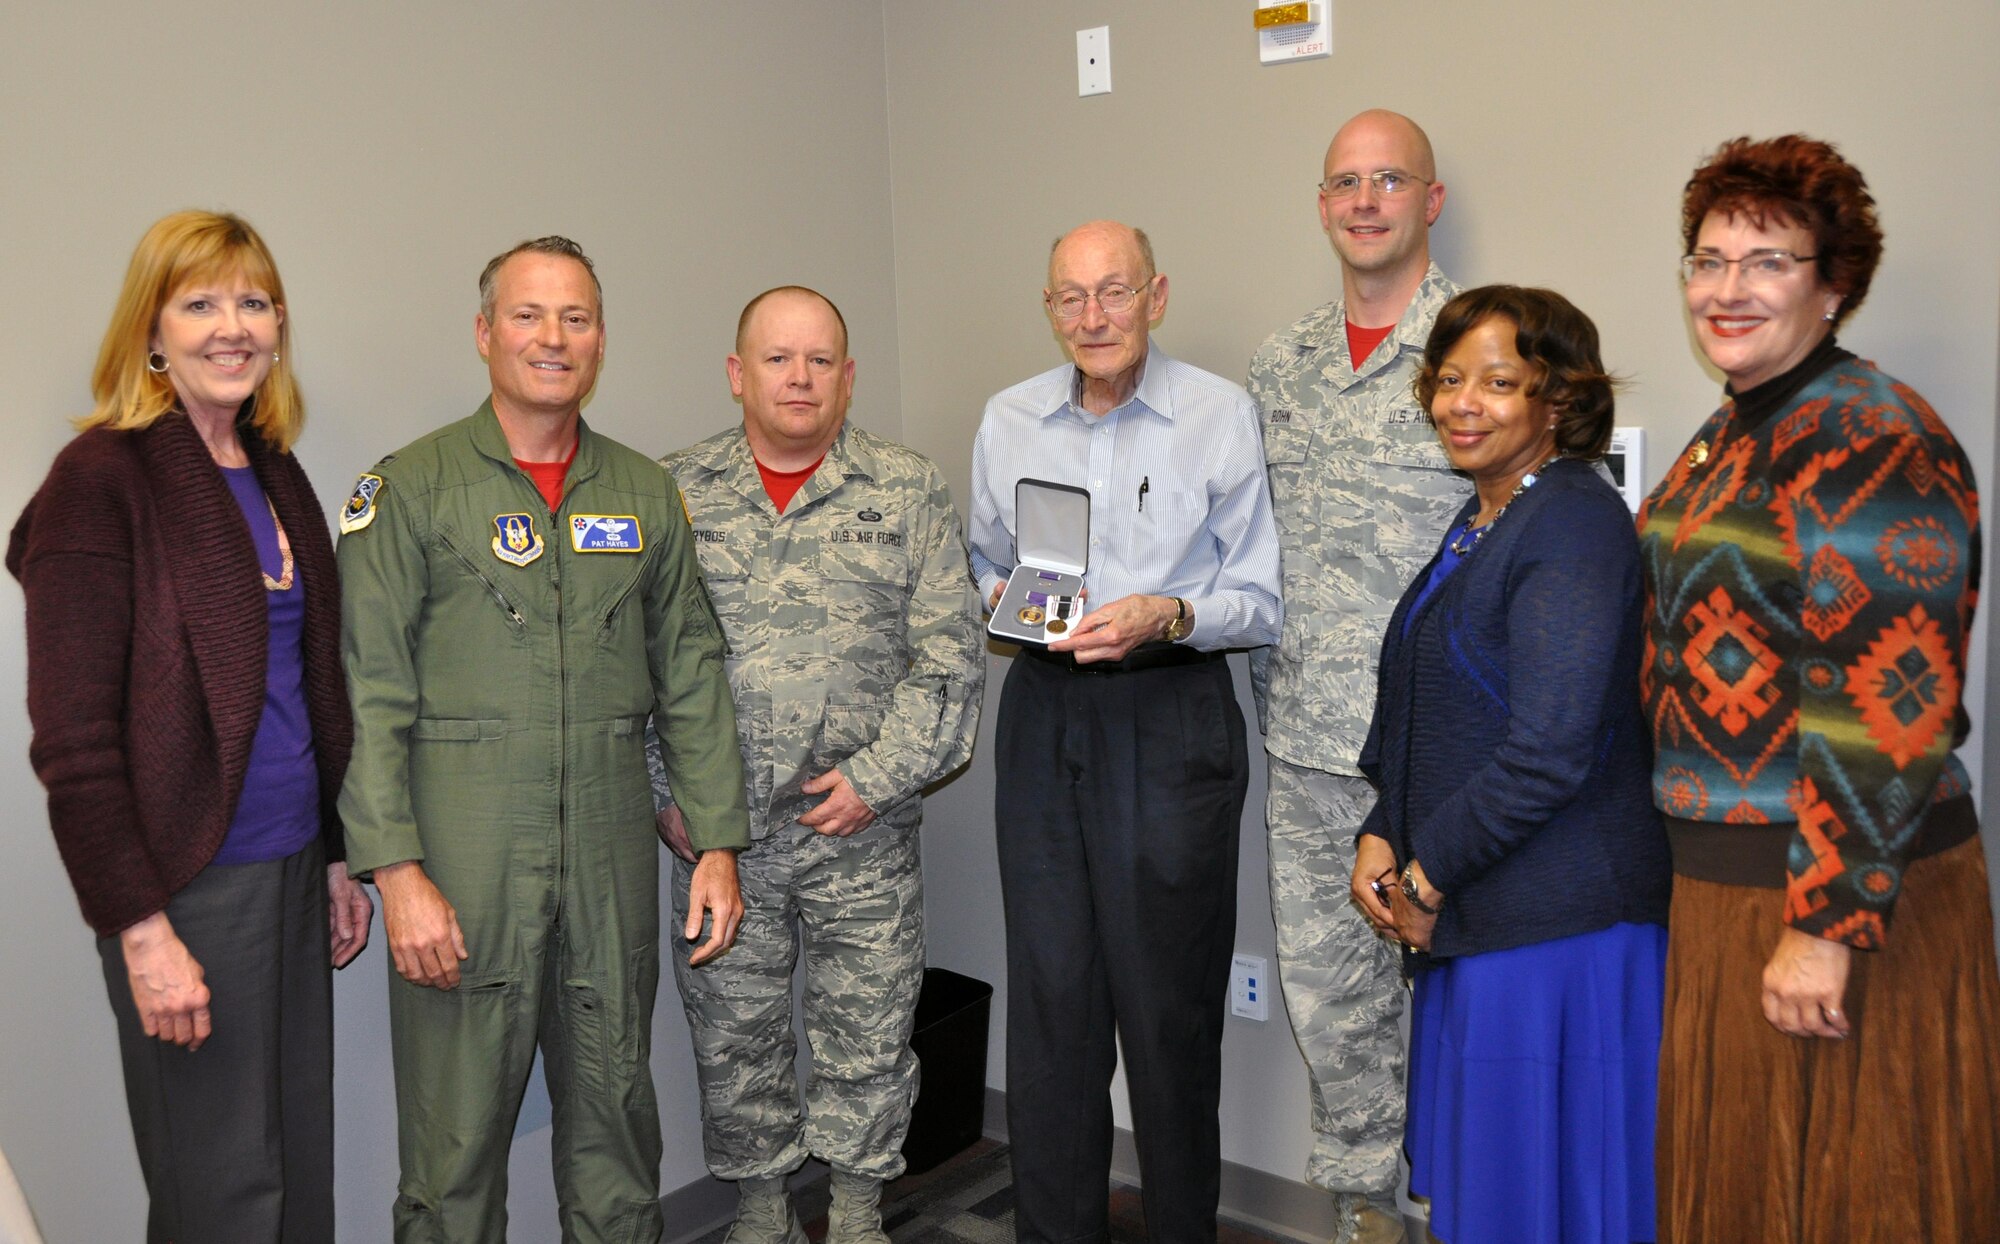 Former 1st Lt. Clayton A. Nattier, a veteran bomber pilot who was held as a prisoner of war during World War II, goes over the medals he received from the Air Reserve Personnel Center with Jacqueline Bing, sustainment division chief, April 17, 2015, on Buckley Air Force Base, Colo. Nattier visited ARPC to receive his POW Medal among various other medals, then took time to personally meet and thank the members on the recognition service team who assisted him. Along with Bing, other members from the ARPC recognition service team who assisted Nattier are: retired Brig. Gen. Pat Quisenberry, evaluations branch chief, Master Sgt. Jeremy Bohn, pre-trained individual manpower division chief, and Master Sgt. Richard Grybos, NCO in charge of training and development. Nattier worked in conjunction with retired Lt. Col. Kathryn Wirkus, a constituent service representative from U.S. representative Ed Perlmutter’s staff, to attain his POW Medal. A formal presentation to award the POW Medal to Nattier is currently being planned by U.S. representative Ed Perlmutter’s office. (U.S. Air Force photo/Tech. Sgt. Rob Hazelett)